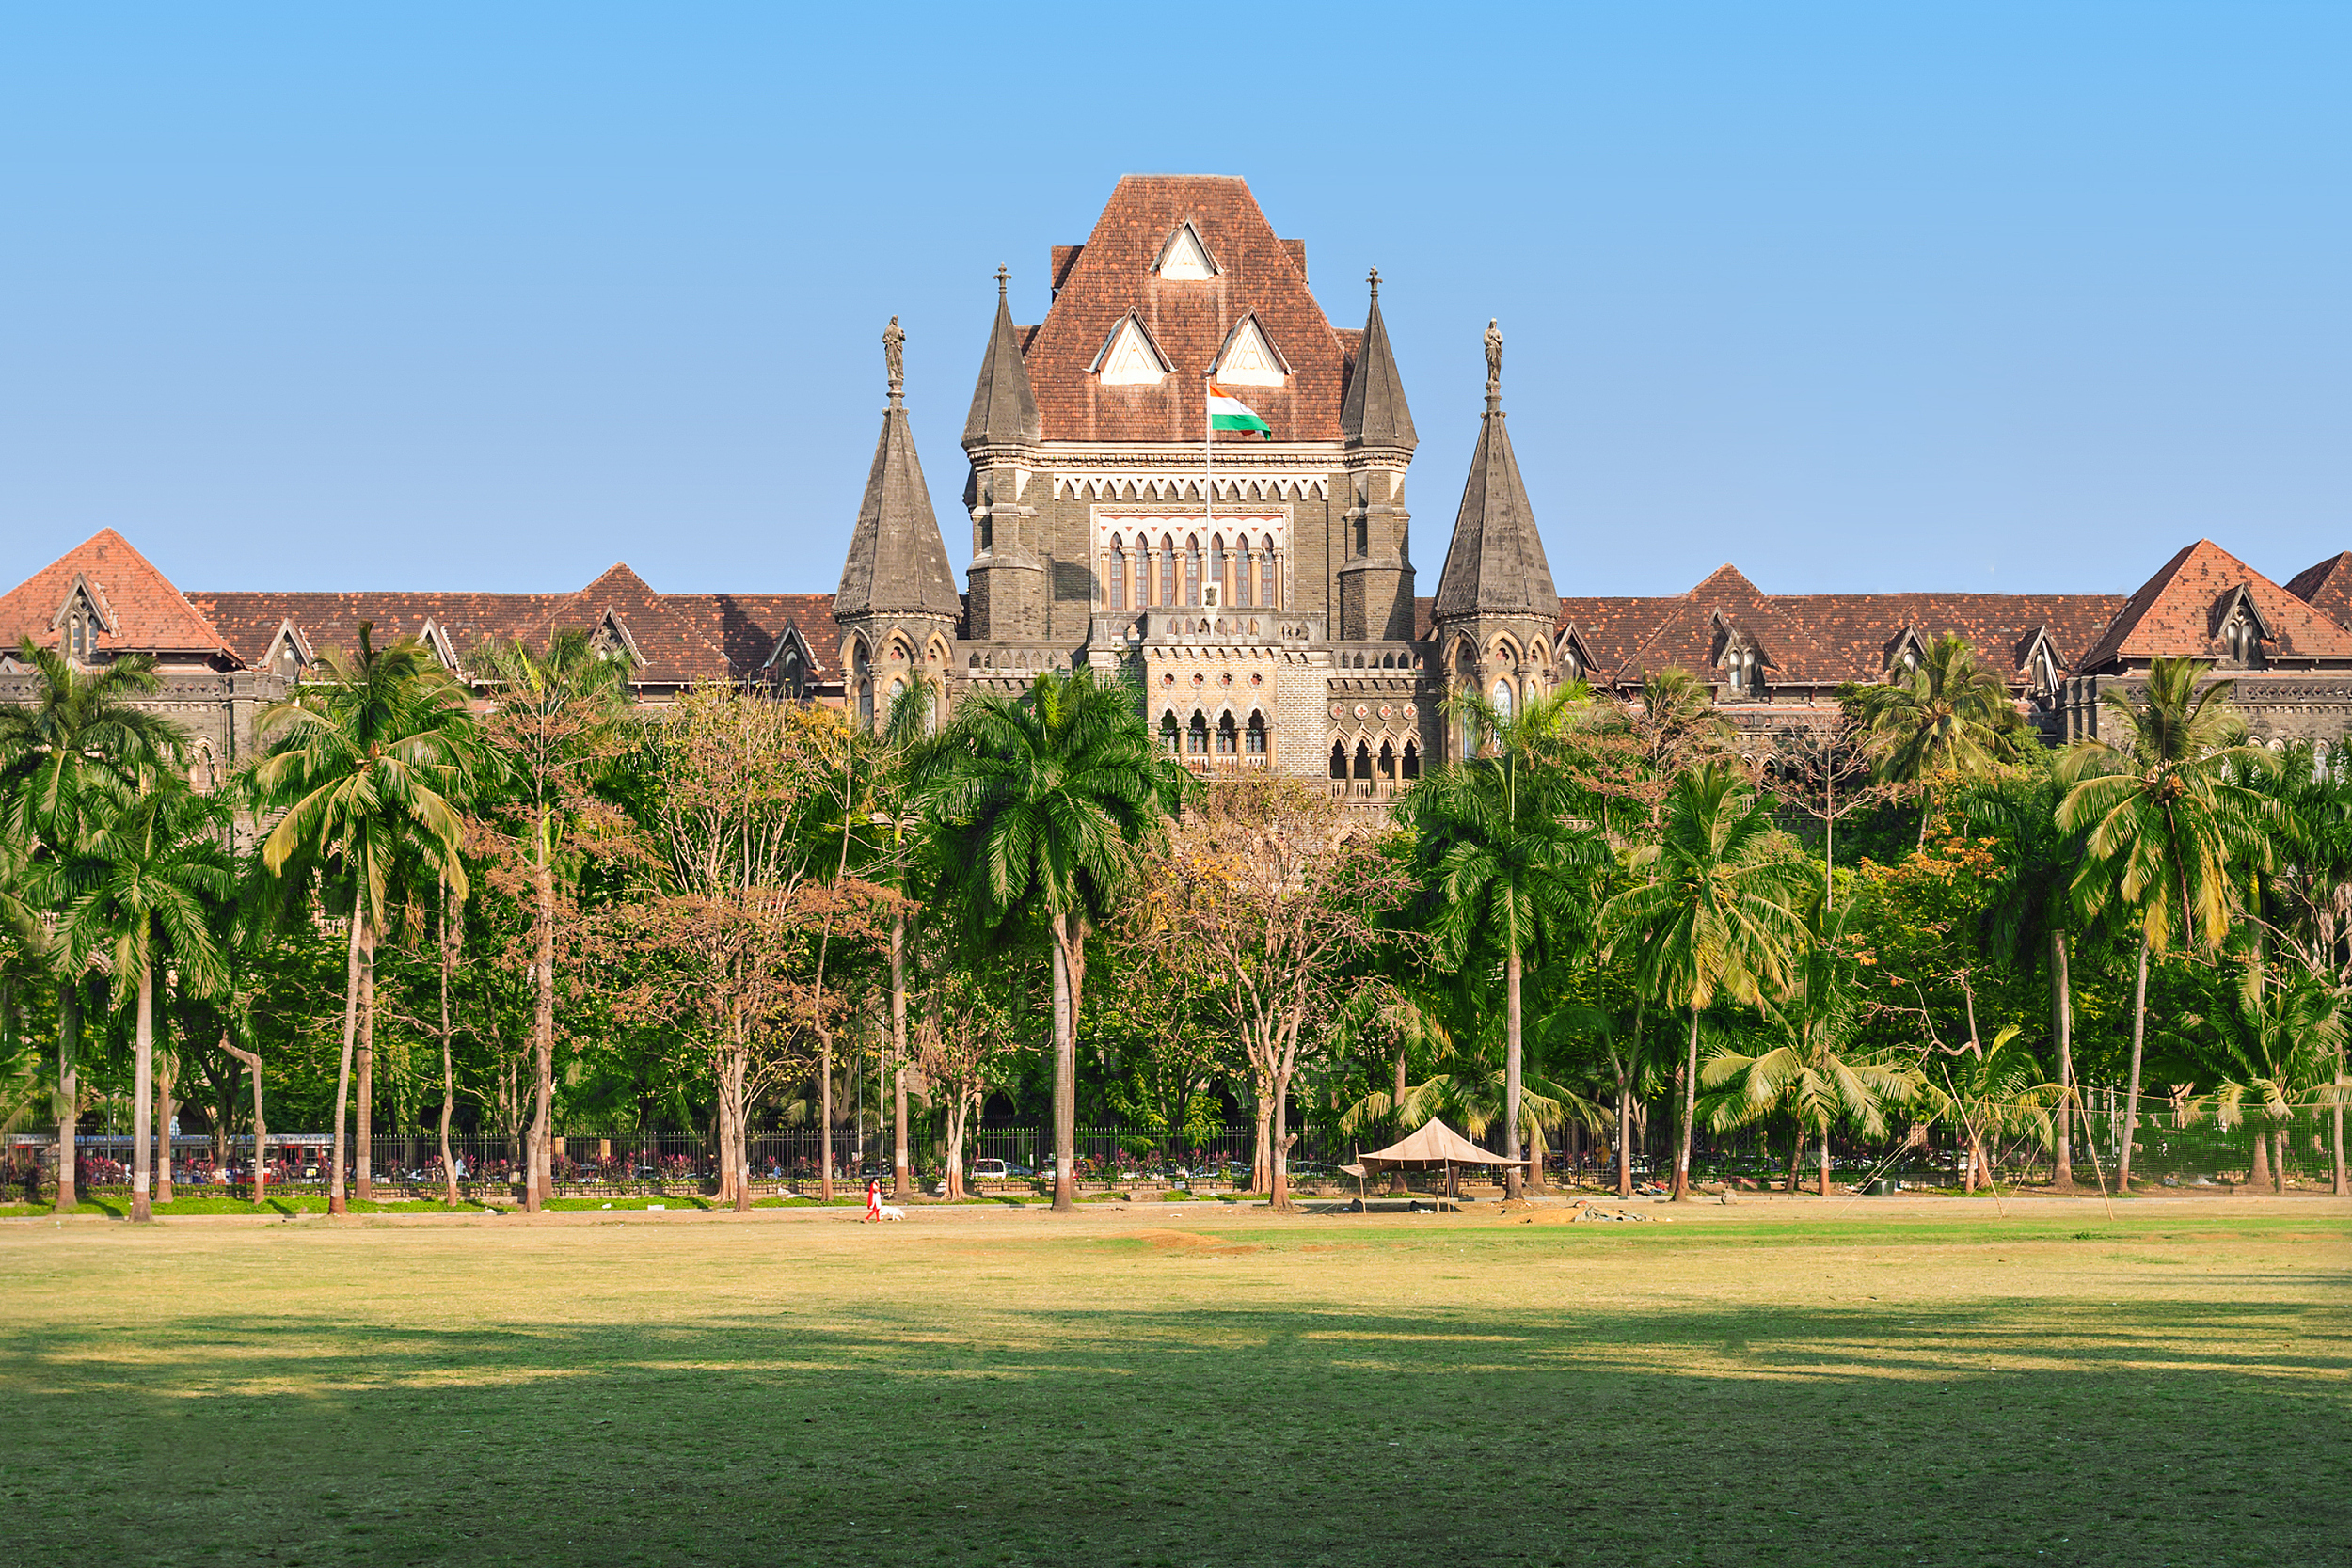 Supreme Court Stays Bombay HC Observation That People Who Feed